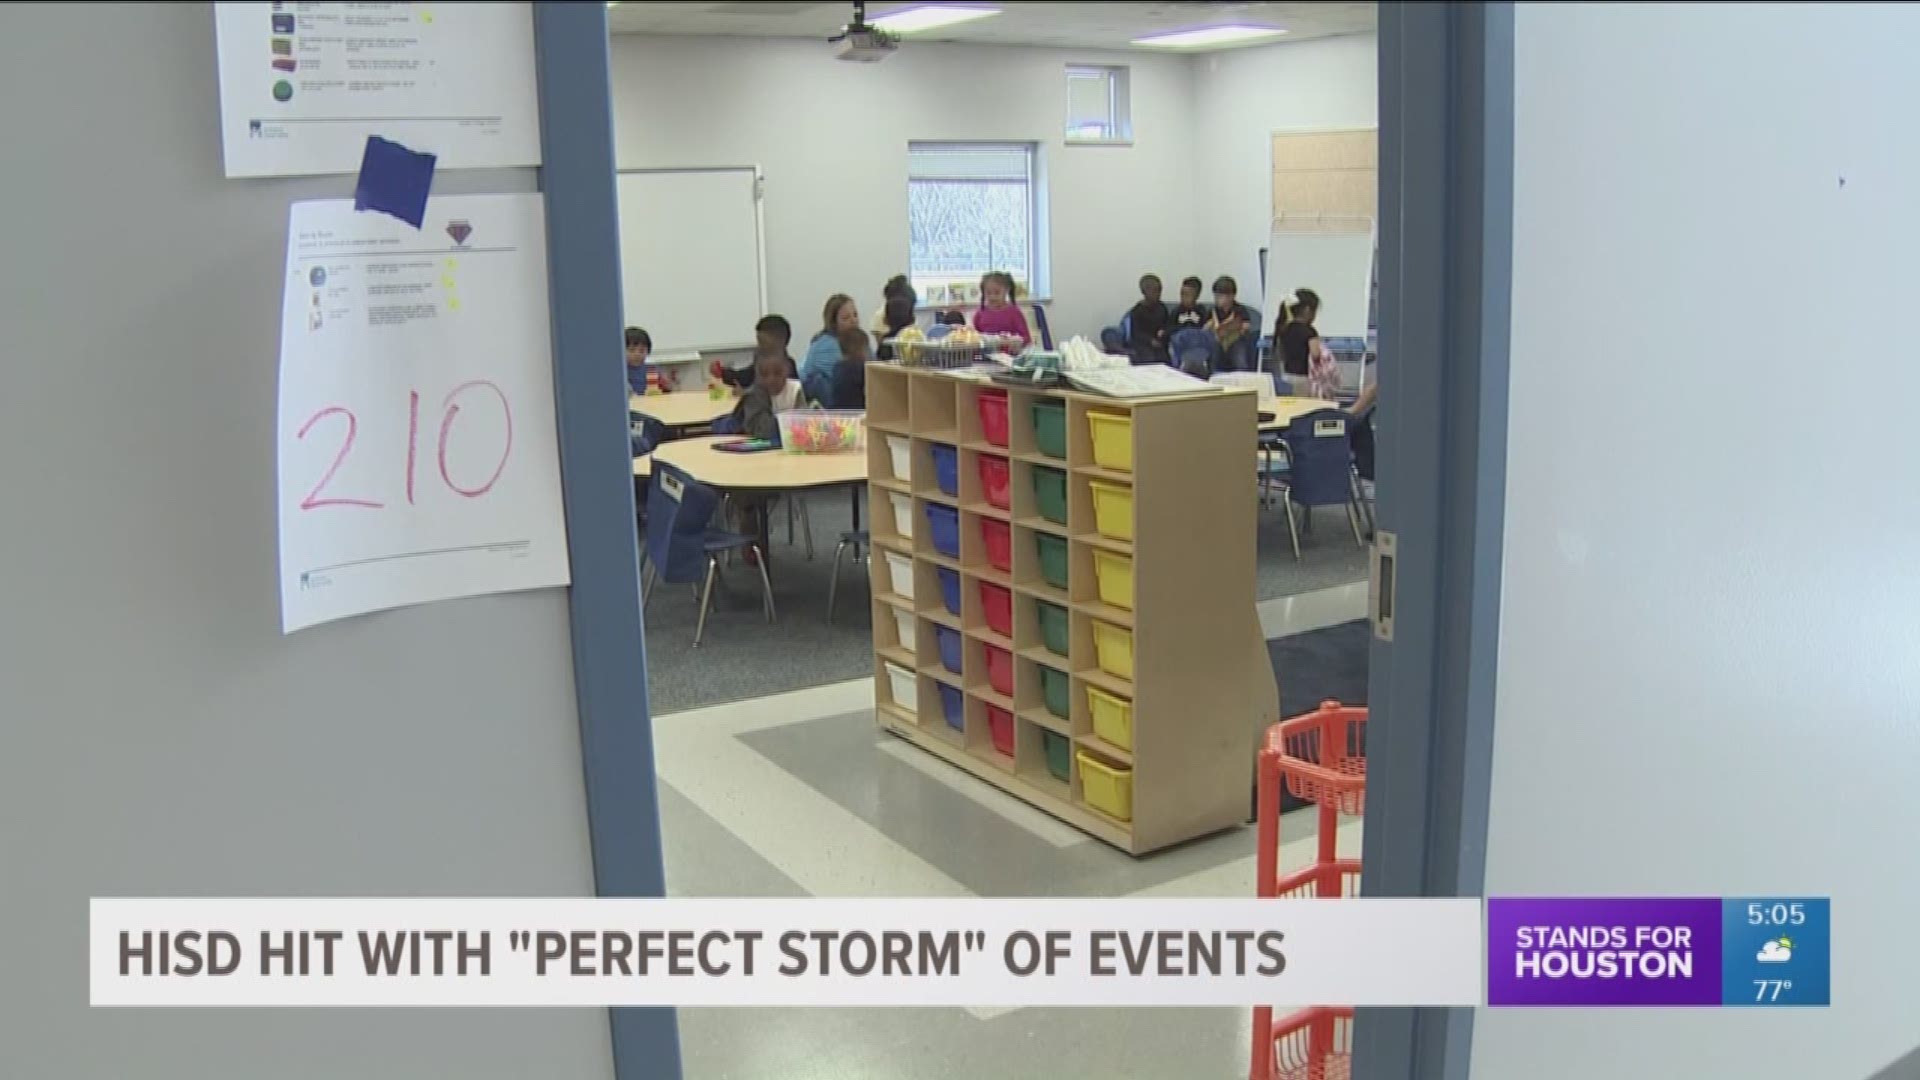 Zeph Capo, the President of the Houston Federation of Teachers, says the recent layoffs are the result of the district being hit with a 'perfect storm.'